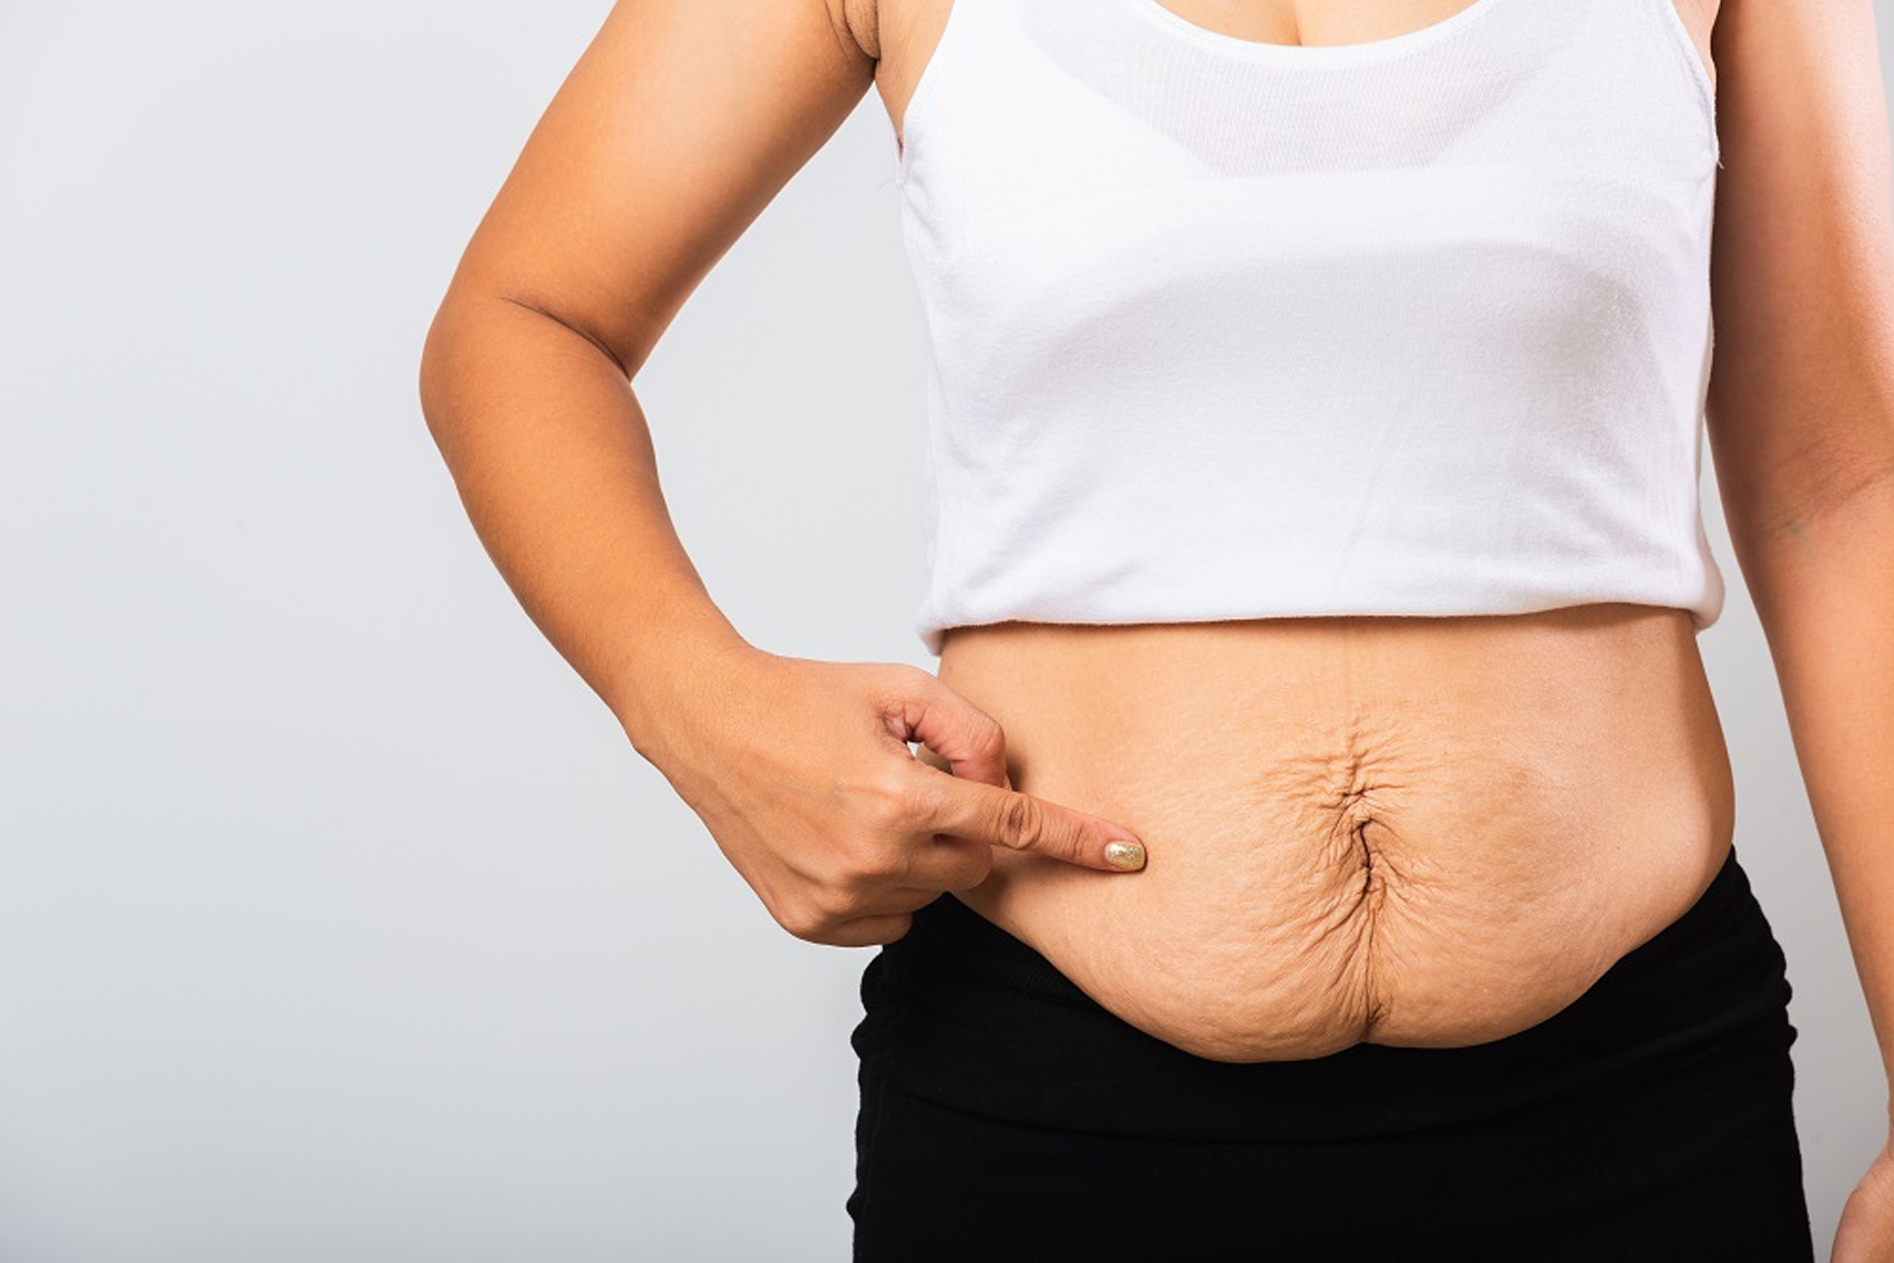 Excess skin problems among adolescents after bariatric surgery